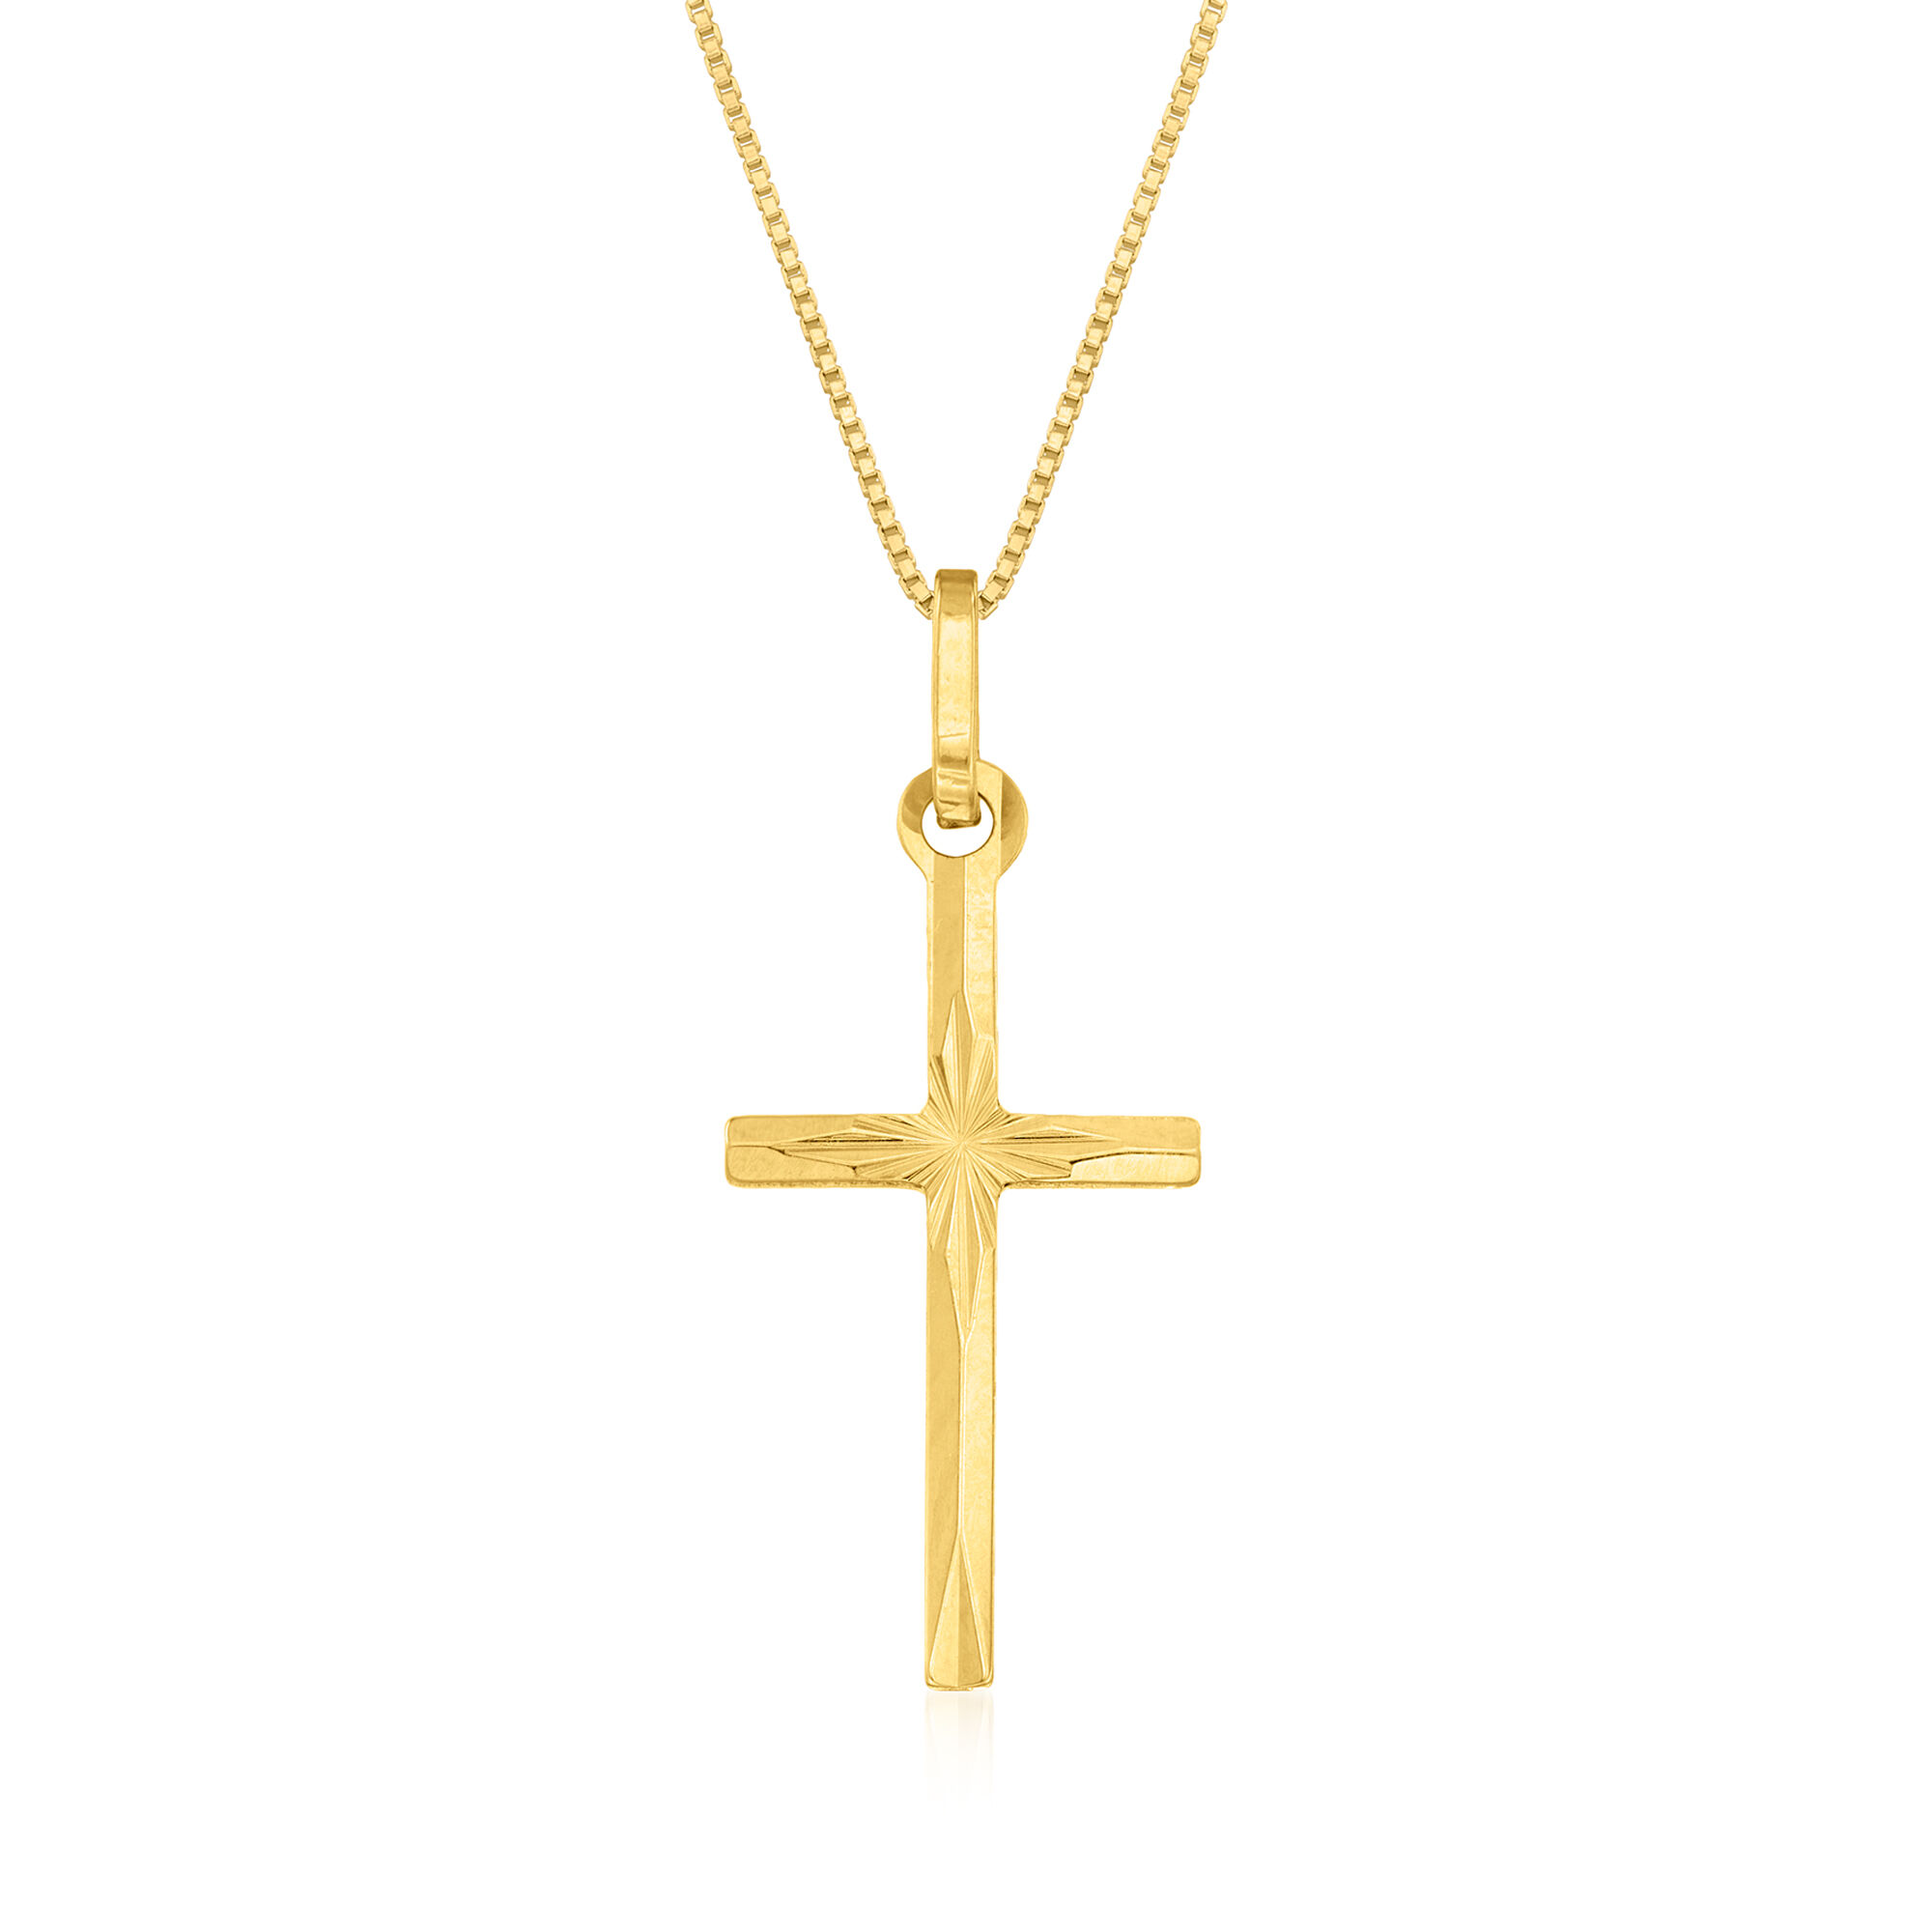 Sterling Silver Polished or Gold Overlay Italian Crucifix Cross Charm Pendant  Necklace (16, 18, 20, 24 Inches) - Walmart.com